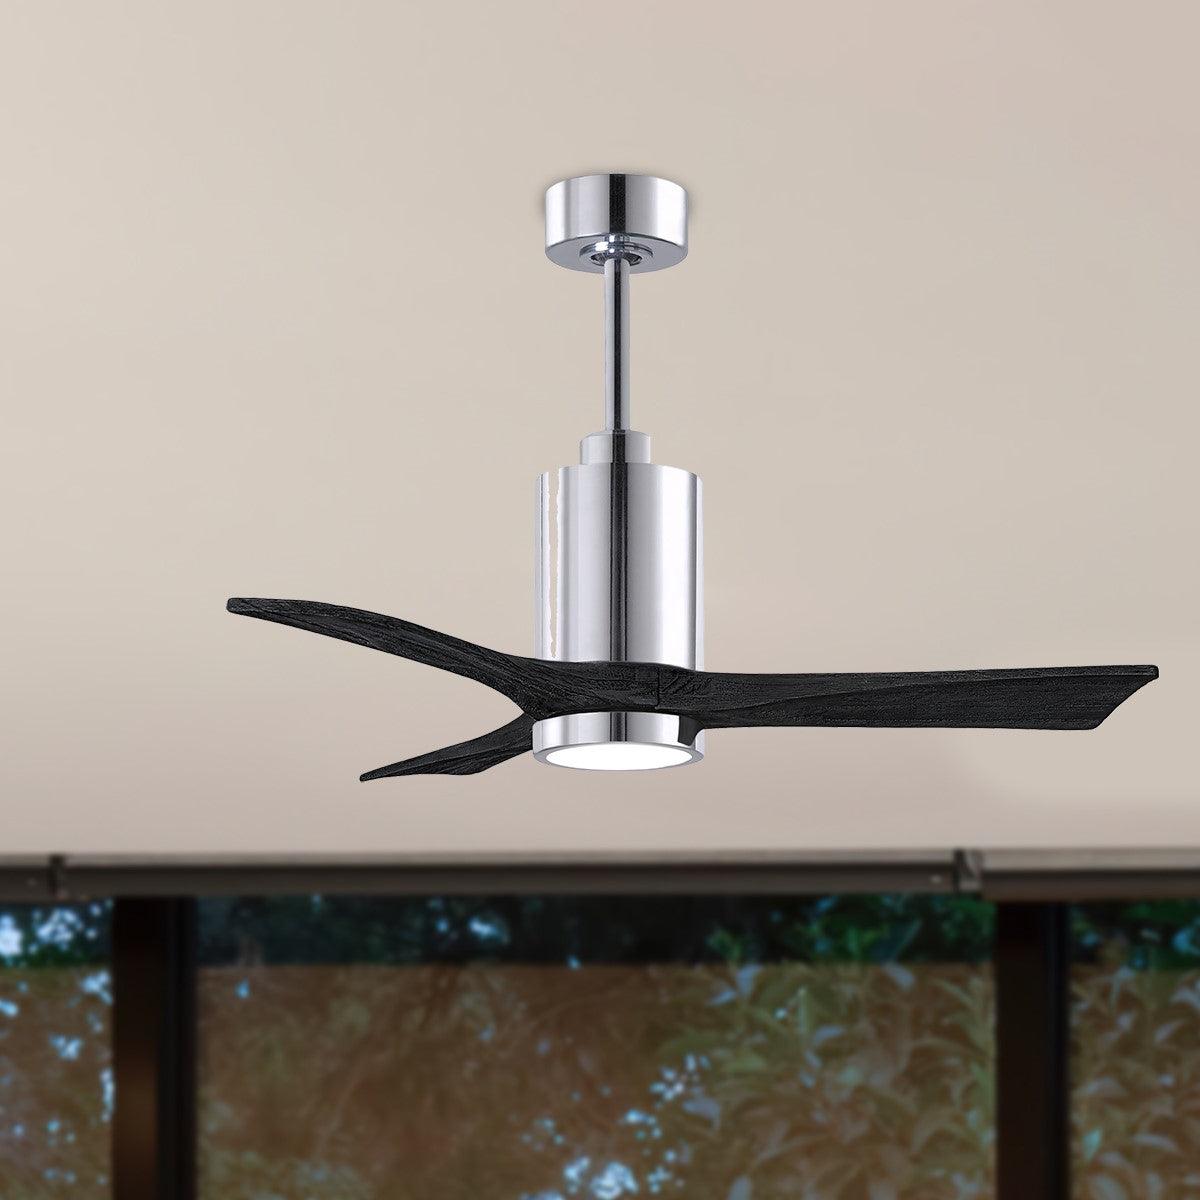 Patricia 42 Inch 3 Blades Modern Outdoor Ceiling Fan With Light, Wall And Remote Control Included